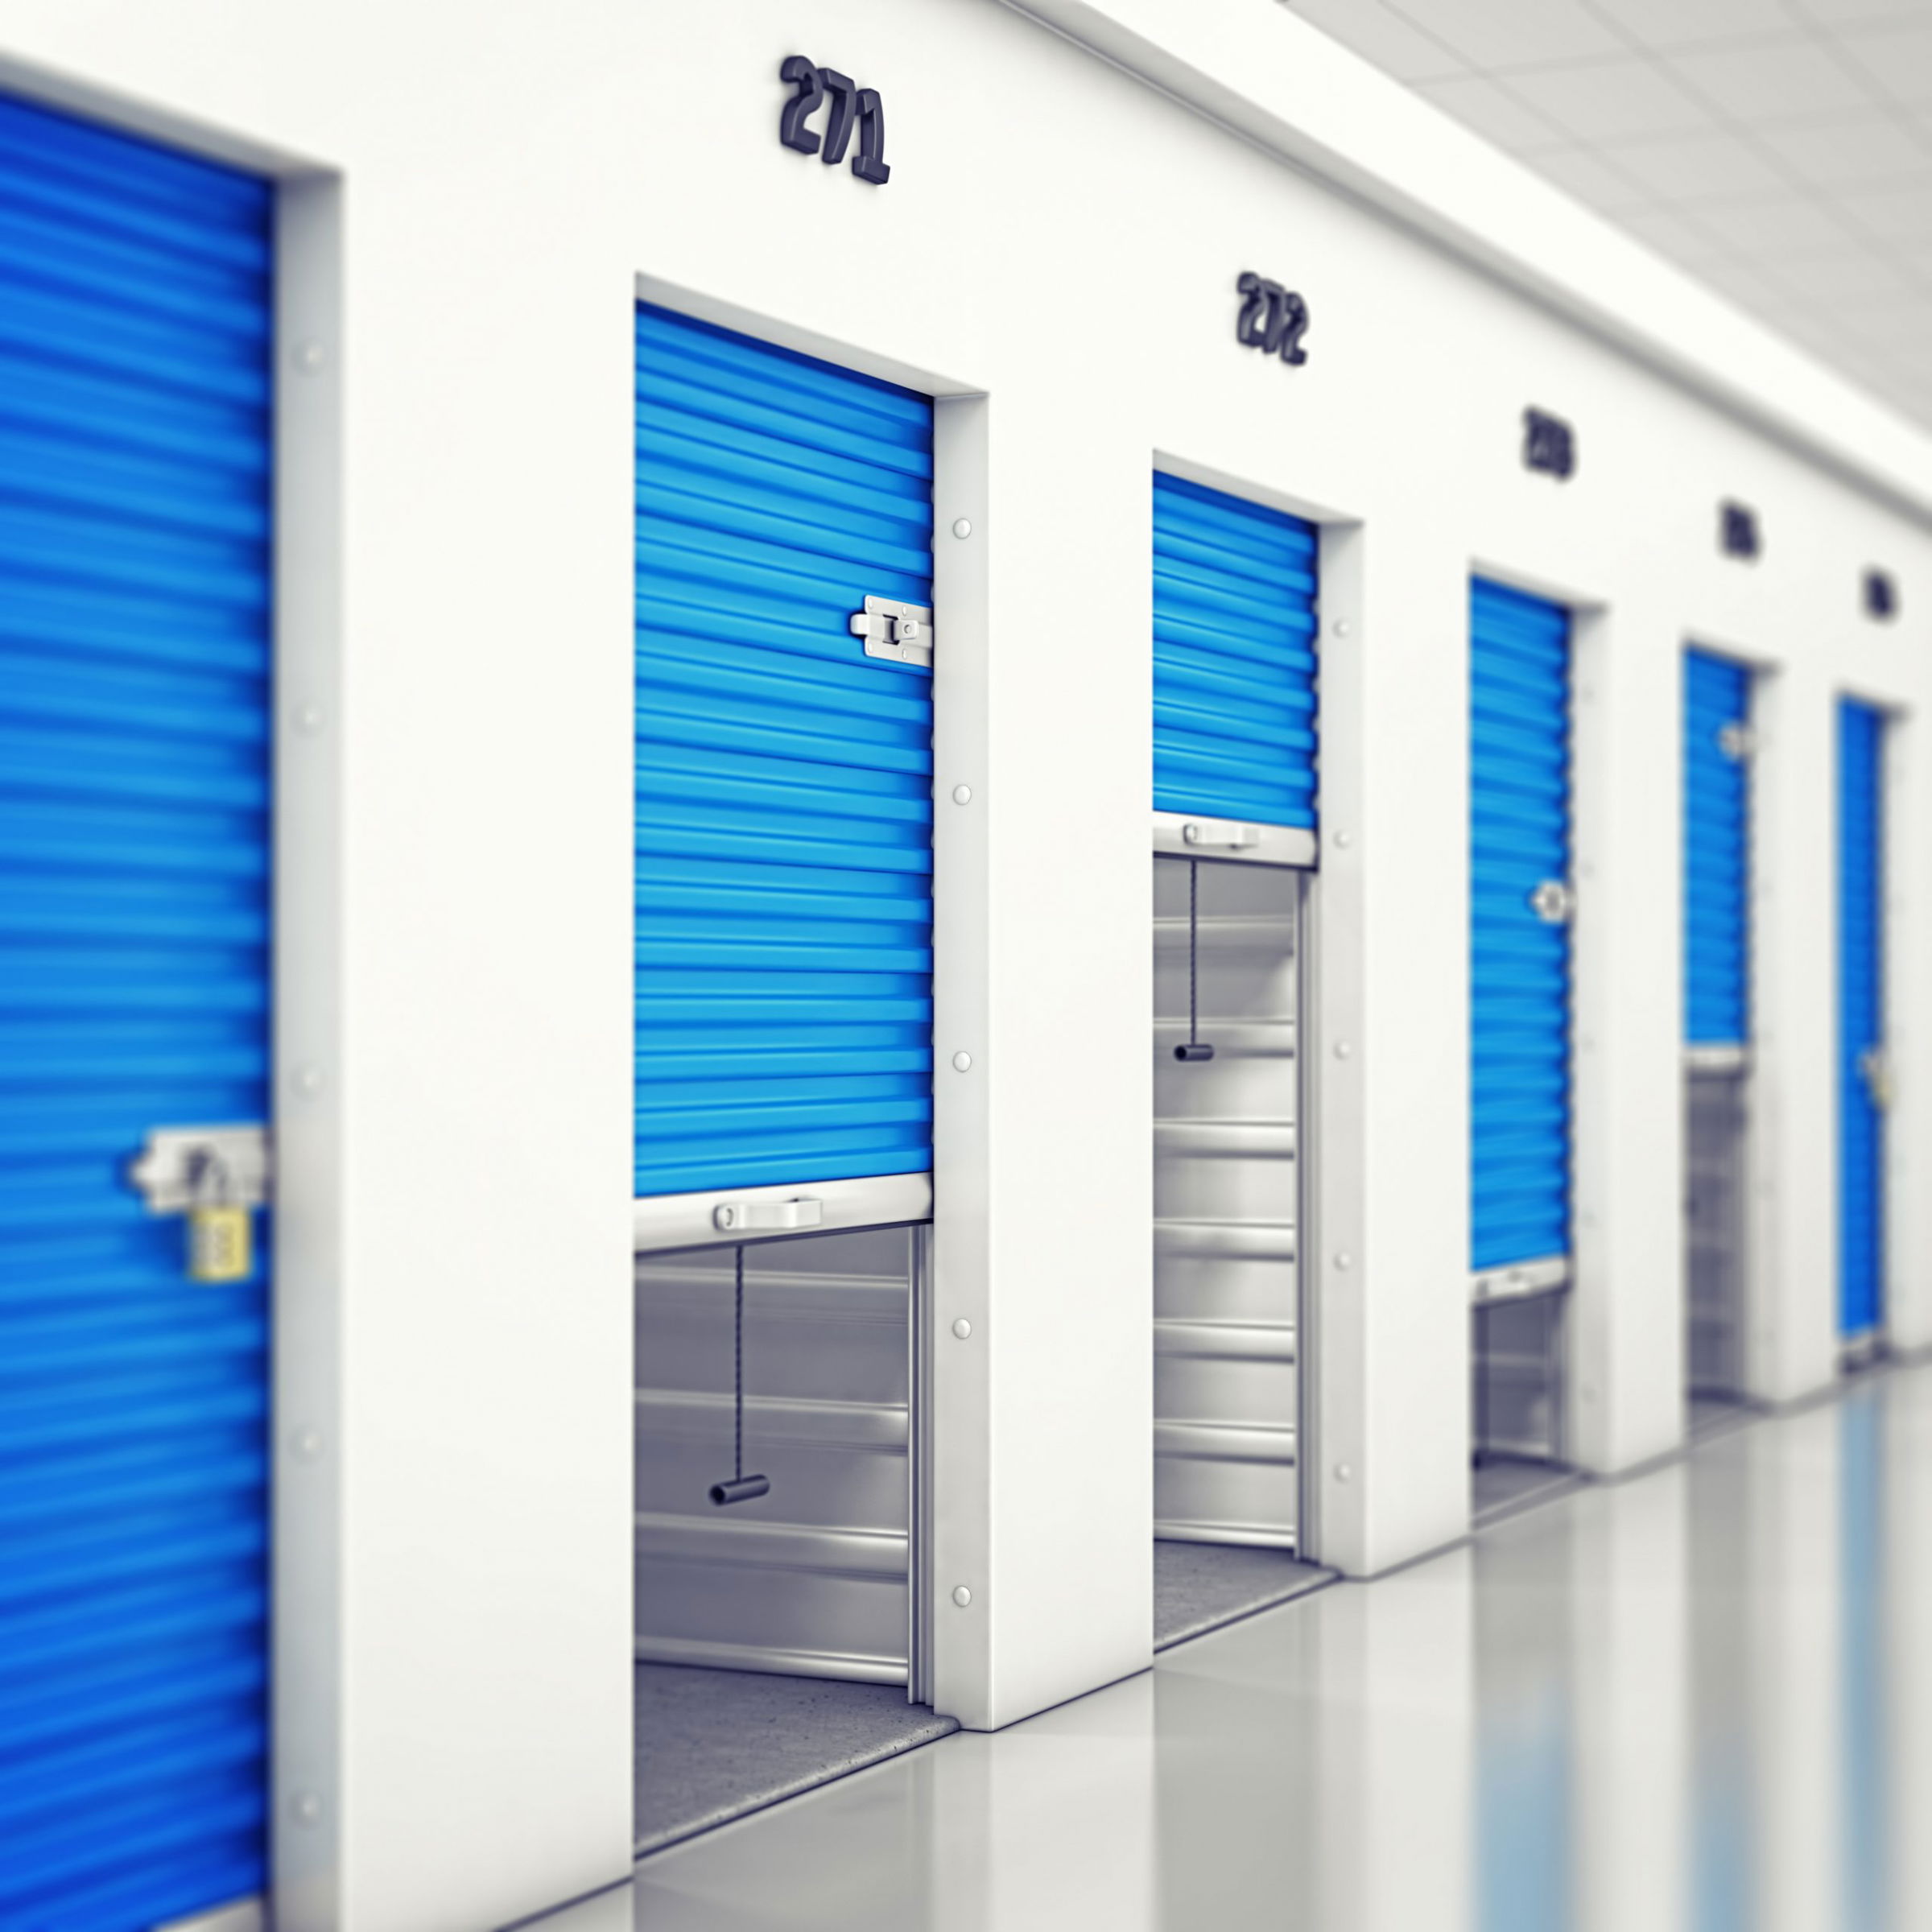 storage units with blue sliding storage unit doors open to different amounts